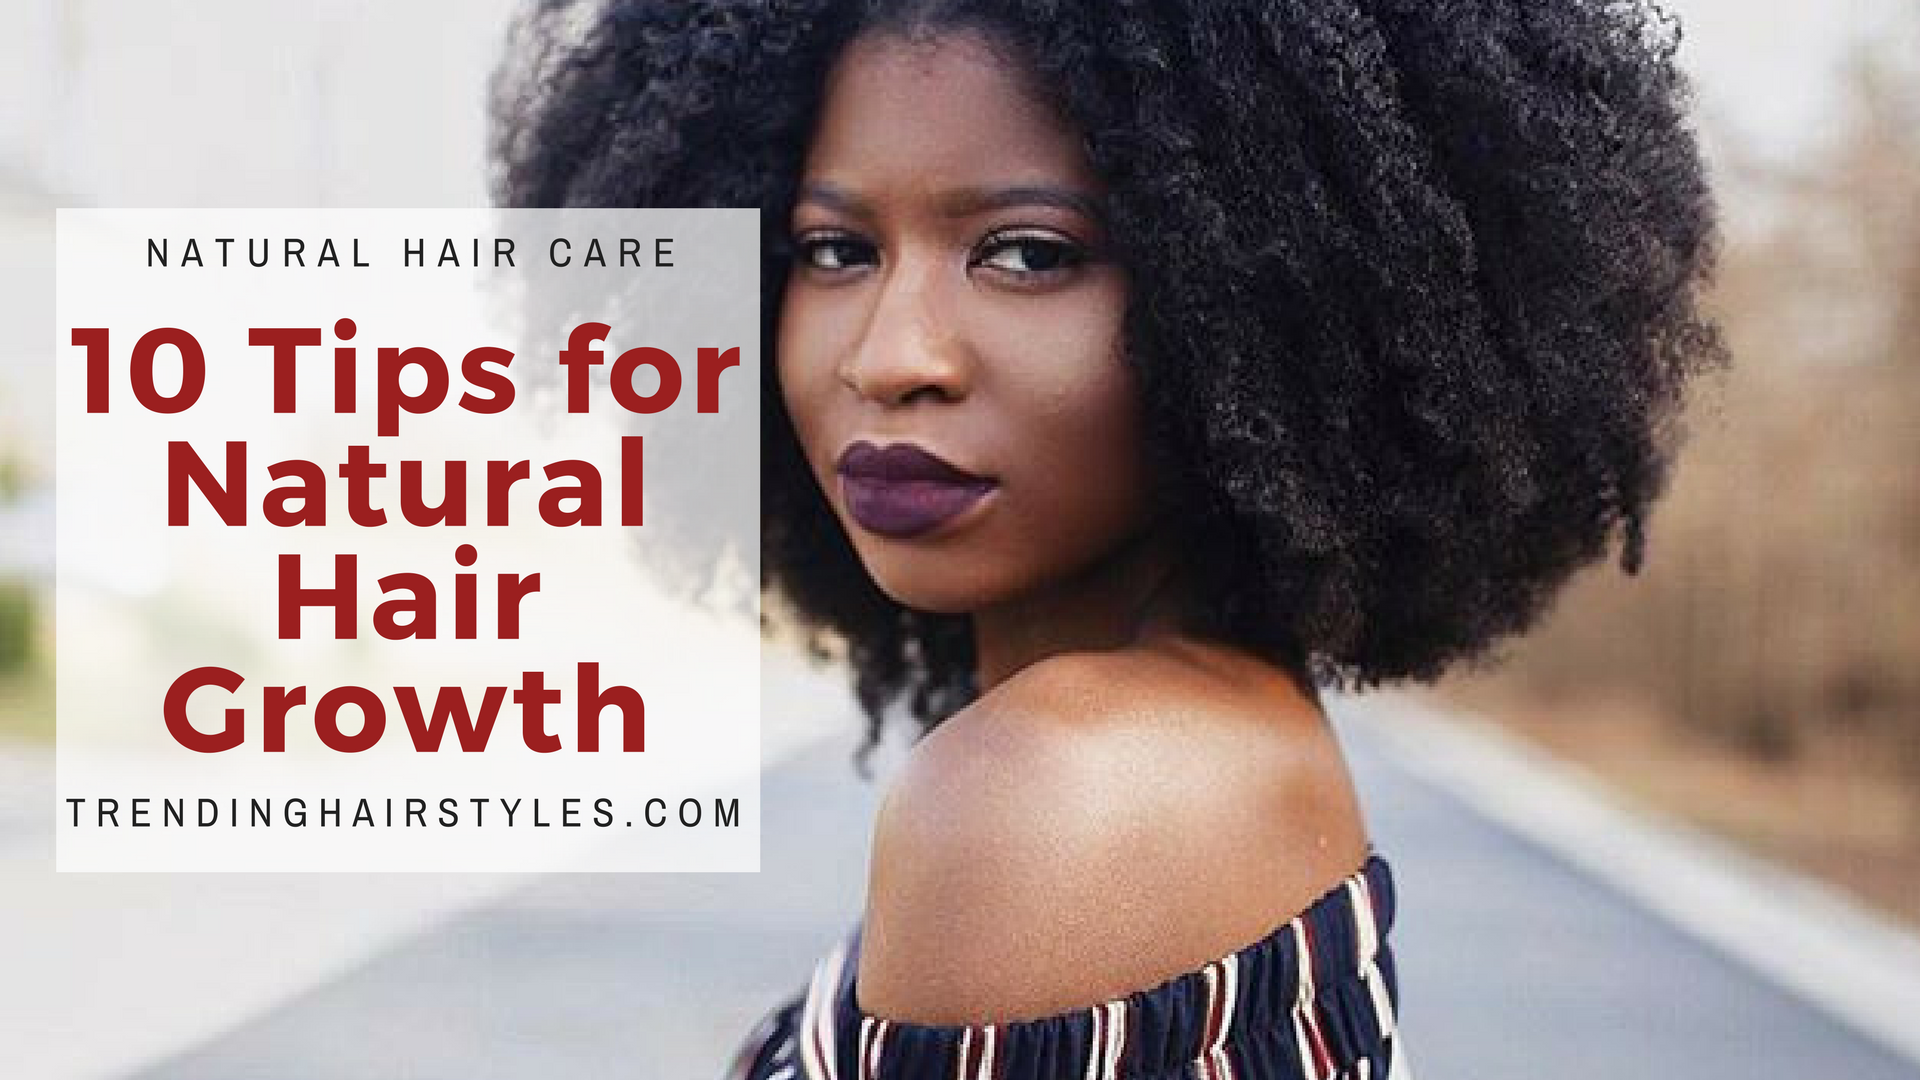 DYI Natural Remedies For Hair Growth For Black Women